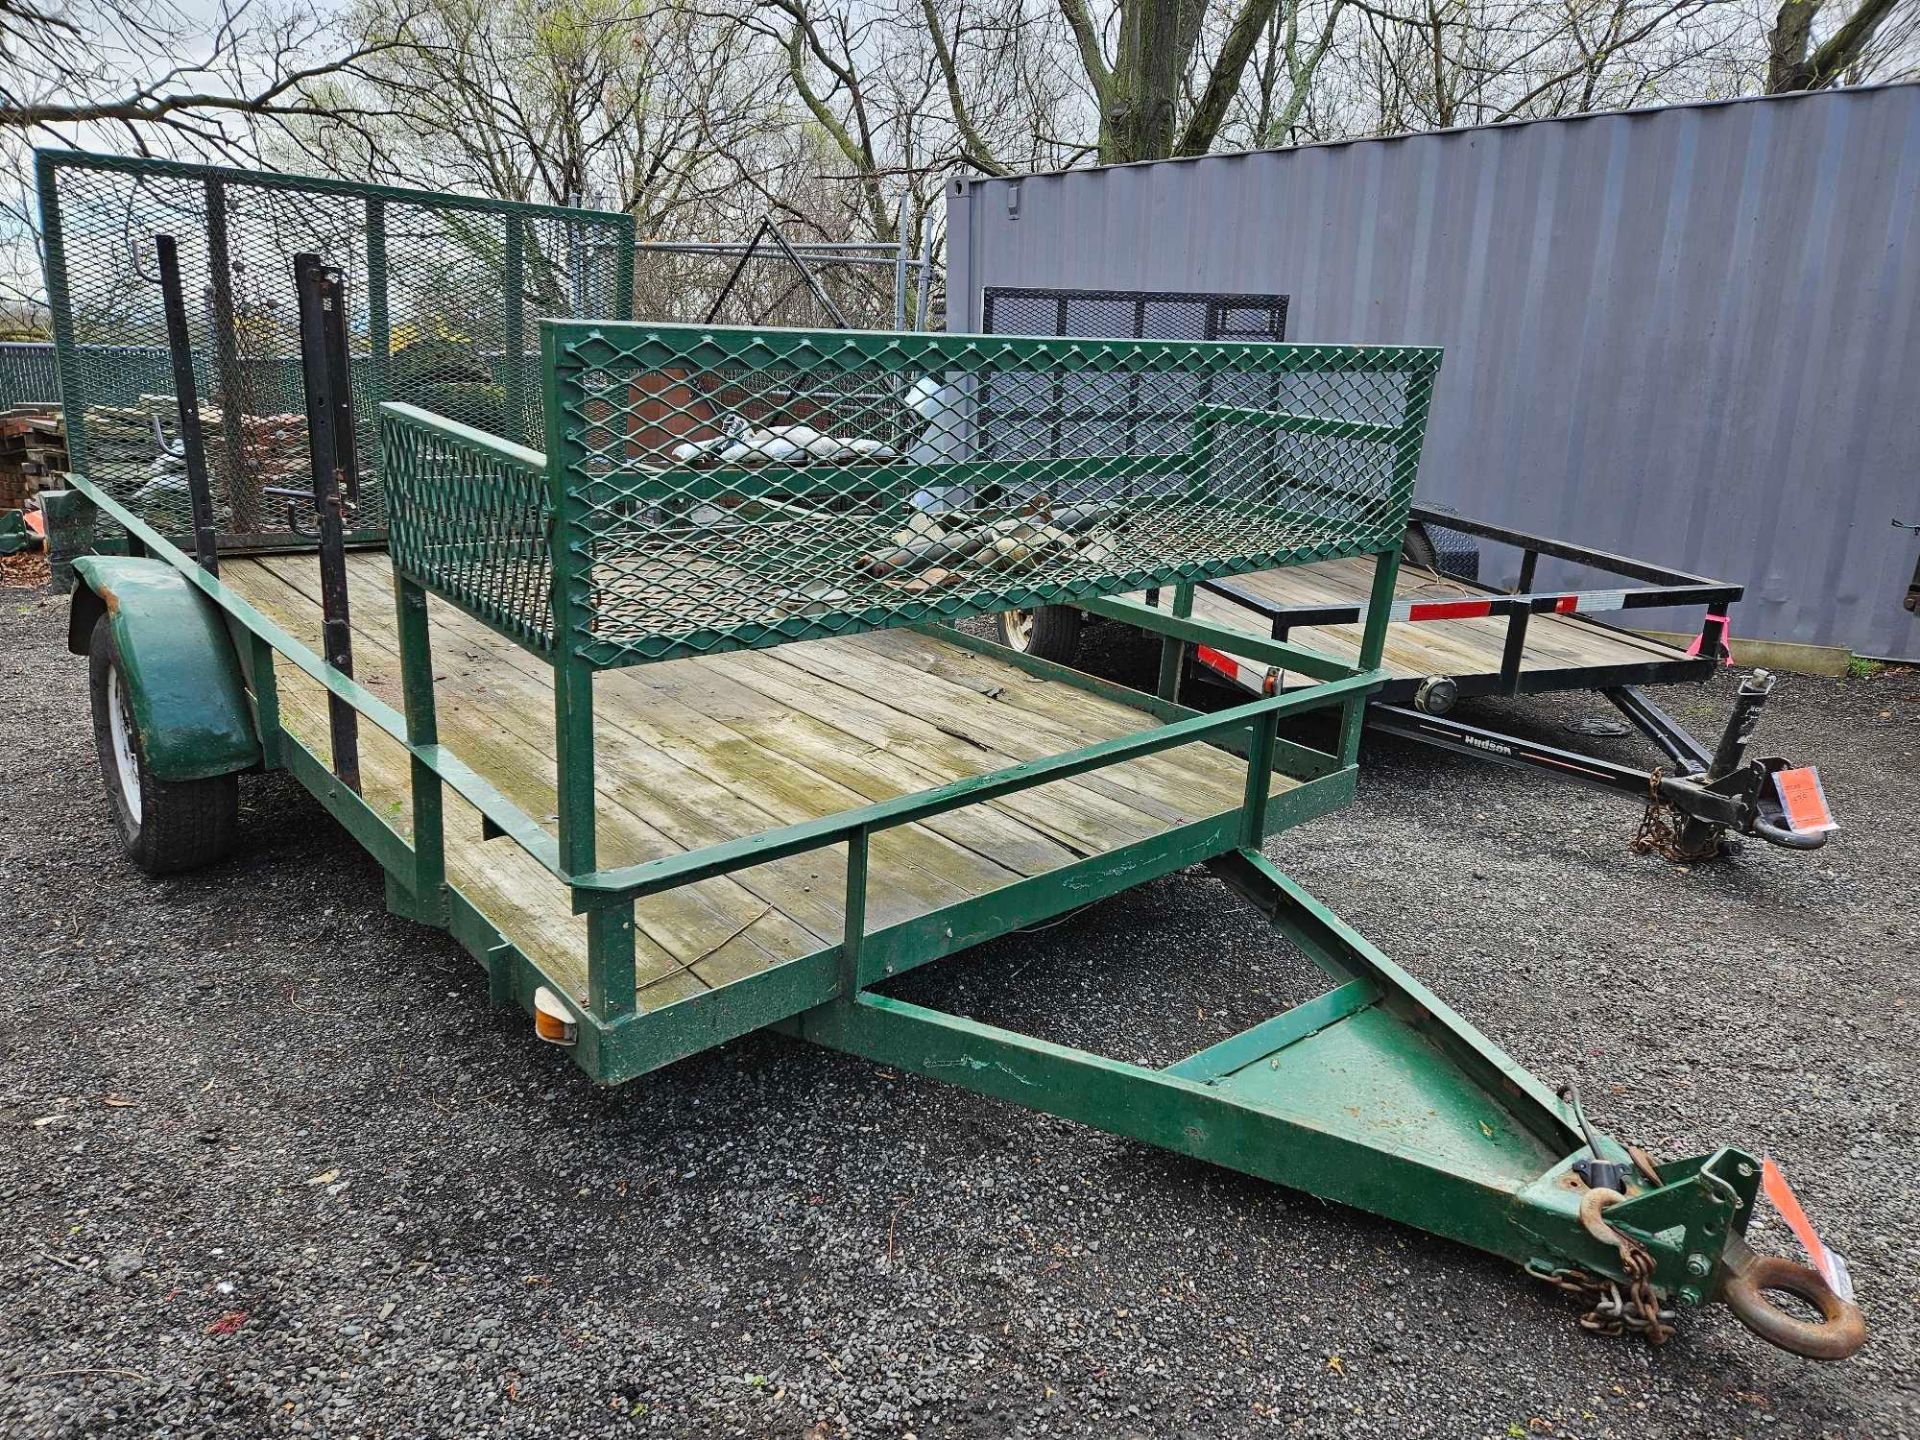 Carry On 12 ft Wood Deck Trailer w/Ramp - Image 2 of 3